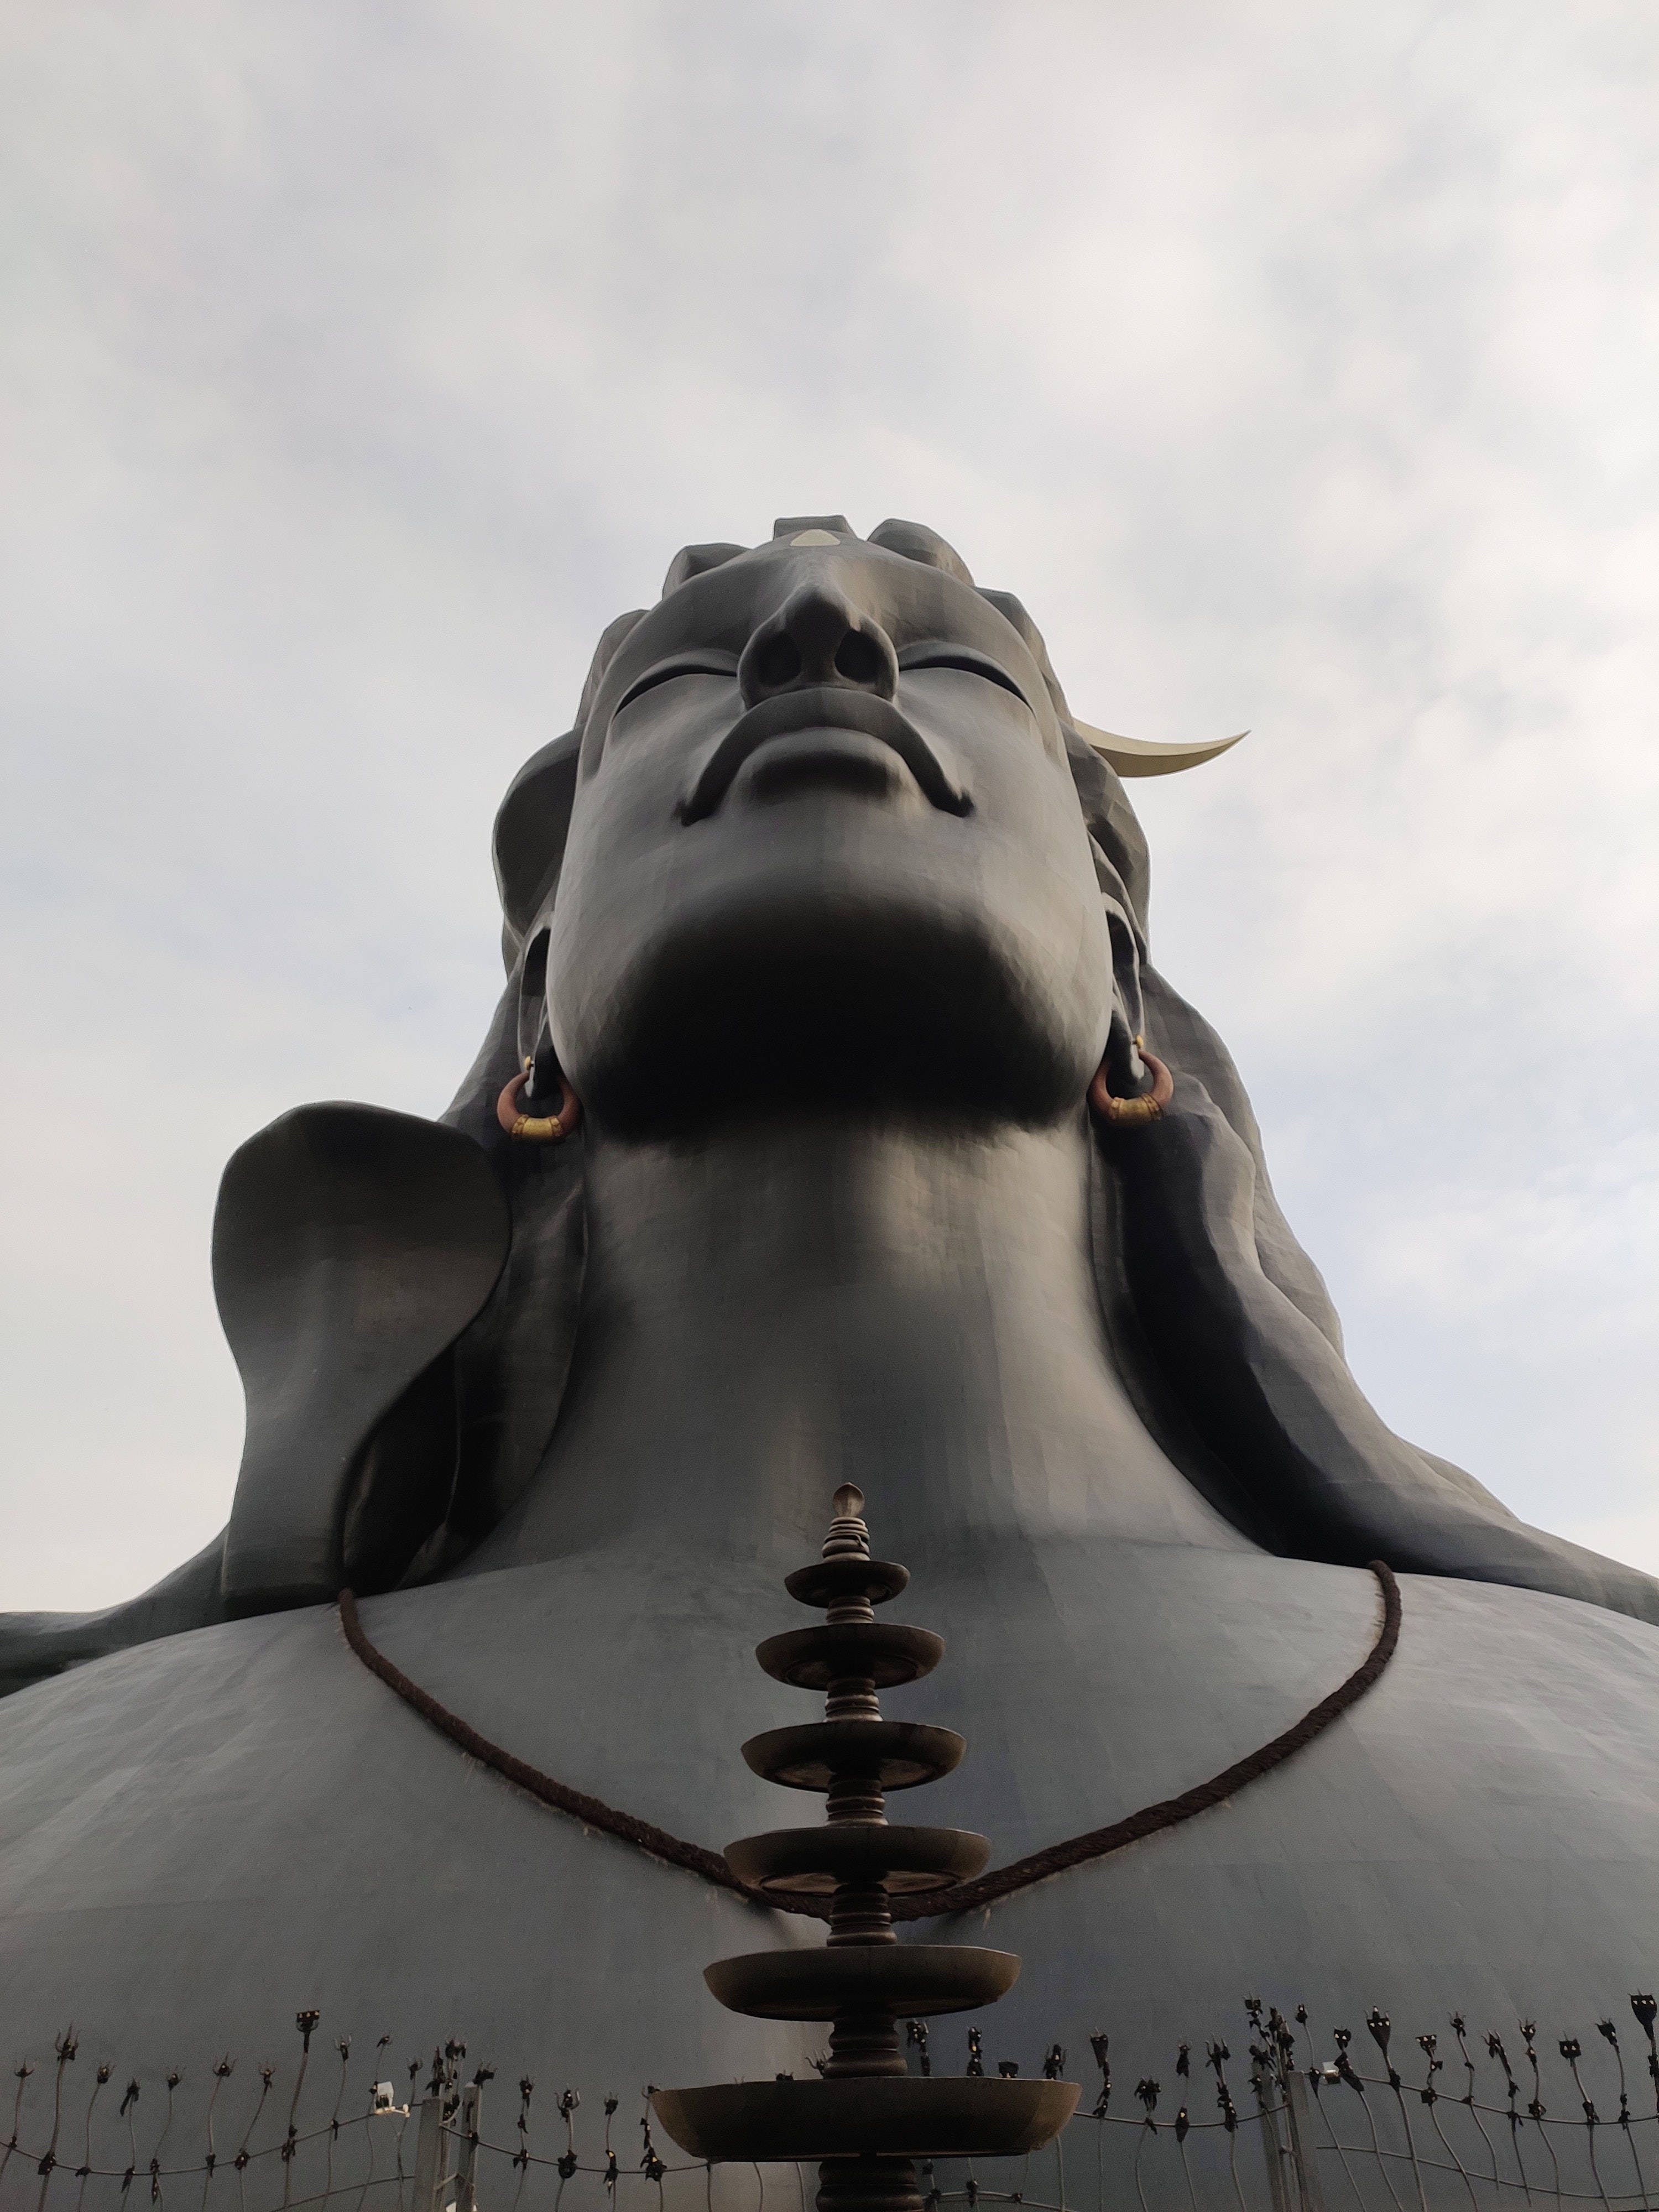 Download Ant View Lord Shiva 8k Wallpaper 